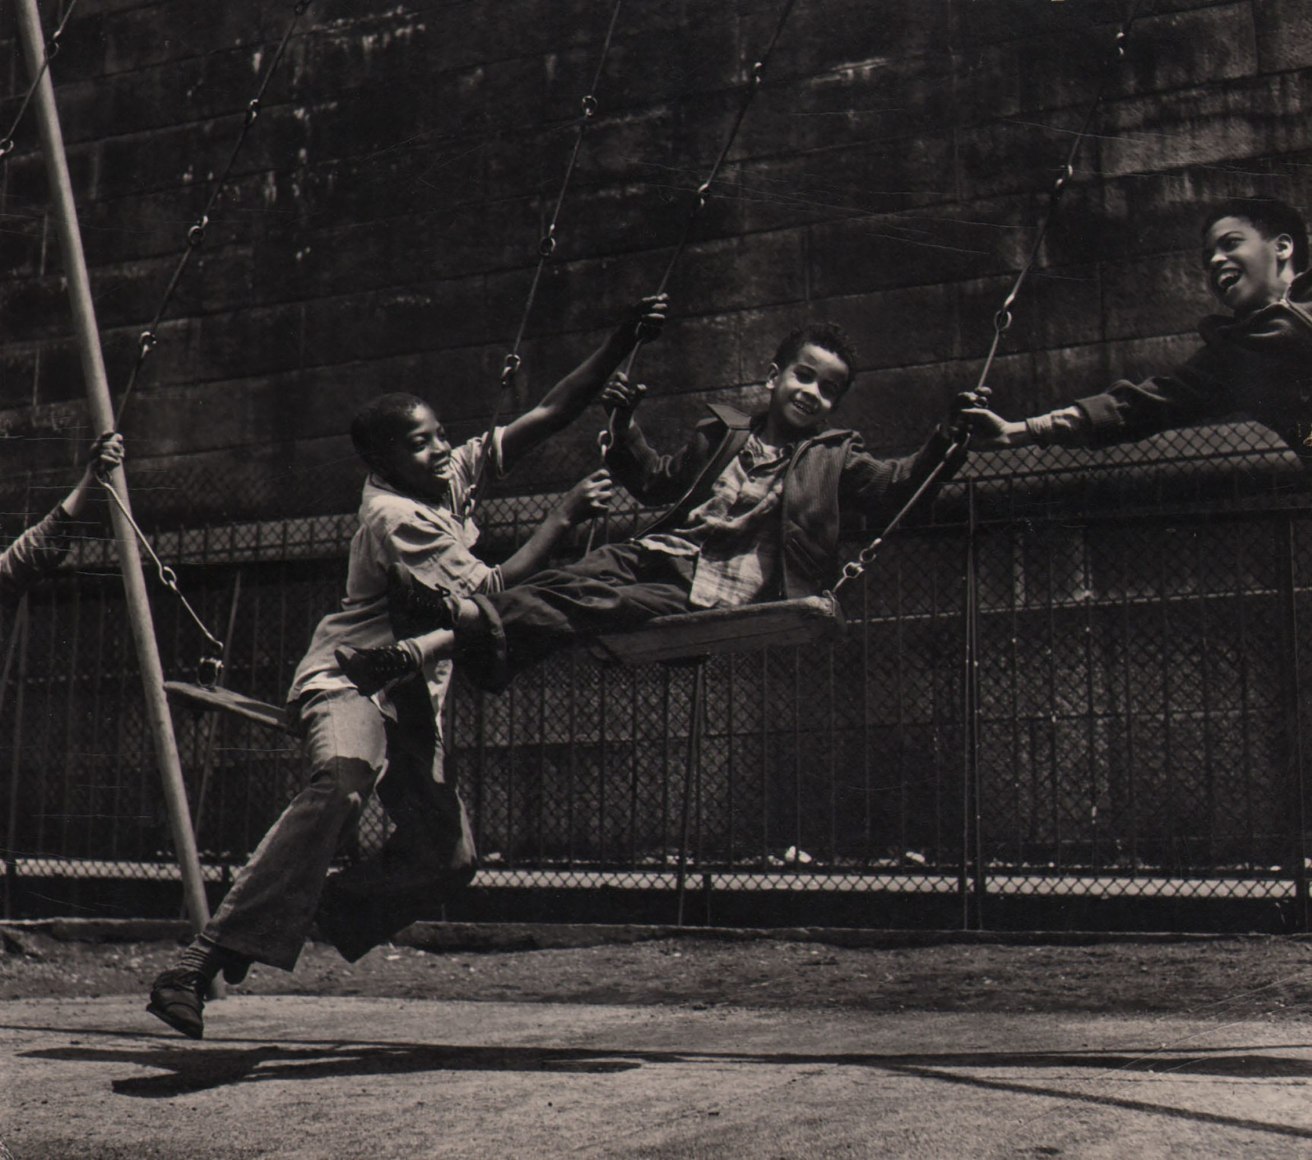 Ken Heyman, Young Crucifix, ​c. 1963. Three young boys play on a swing set; the boys to the left and right reach to hold onto the center swing.